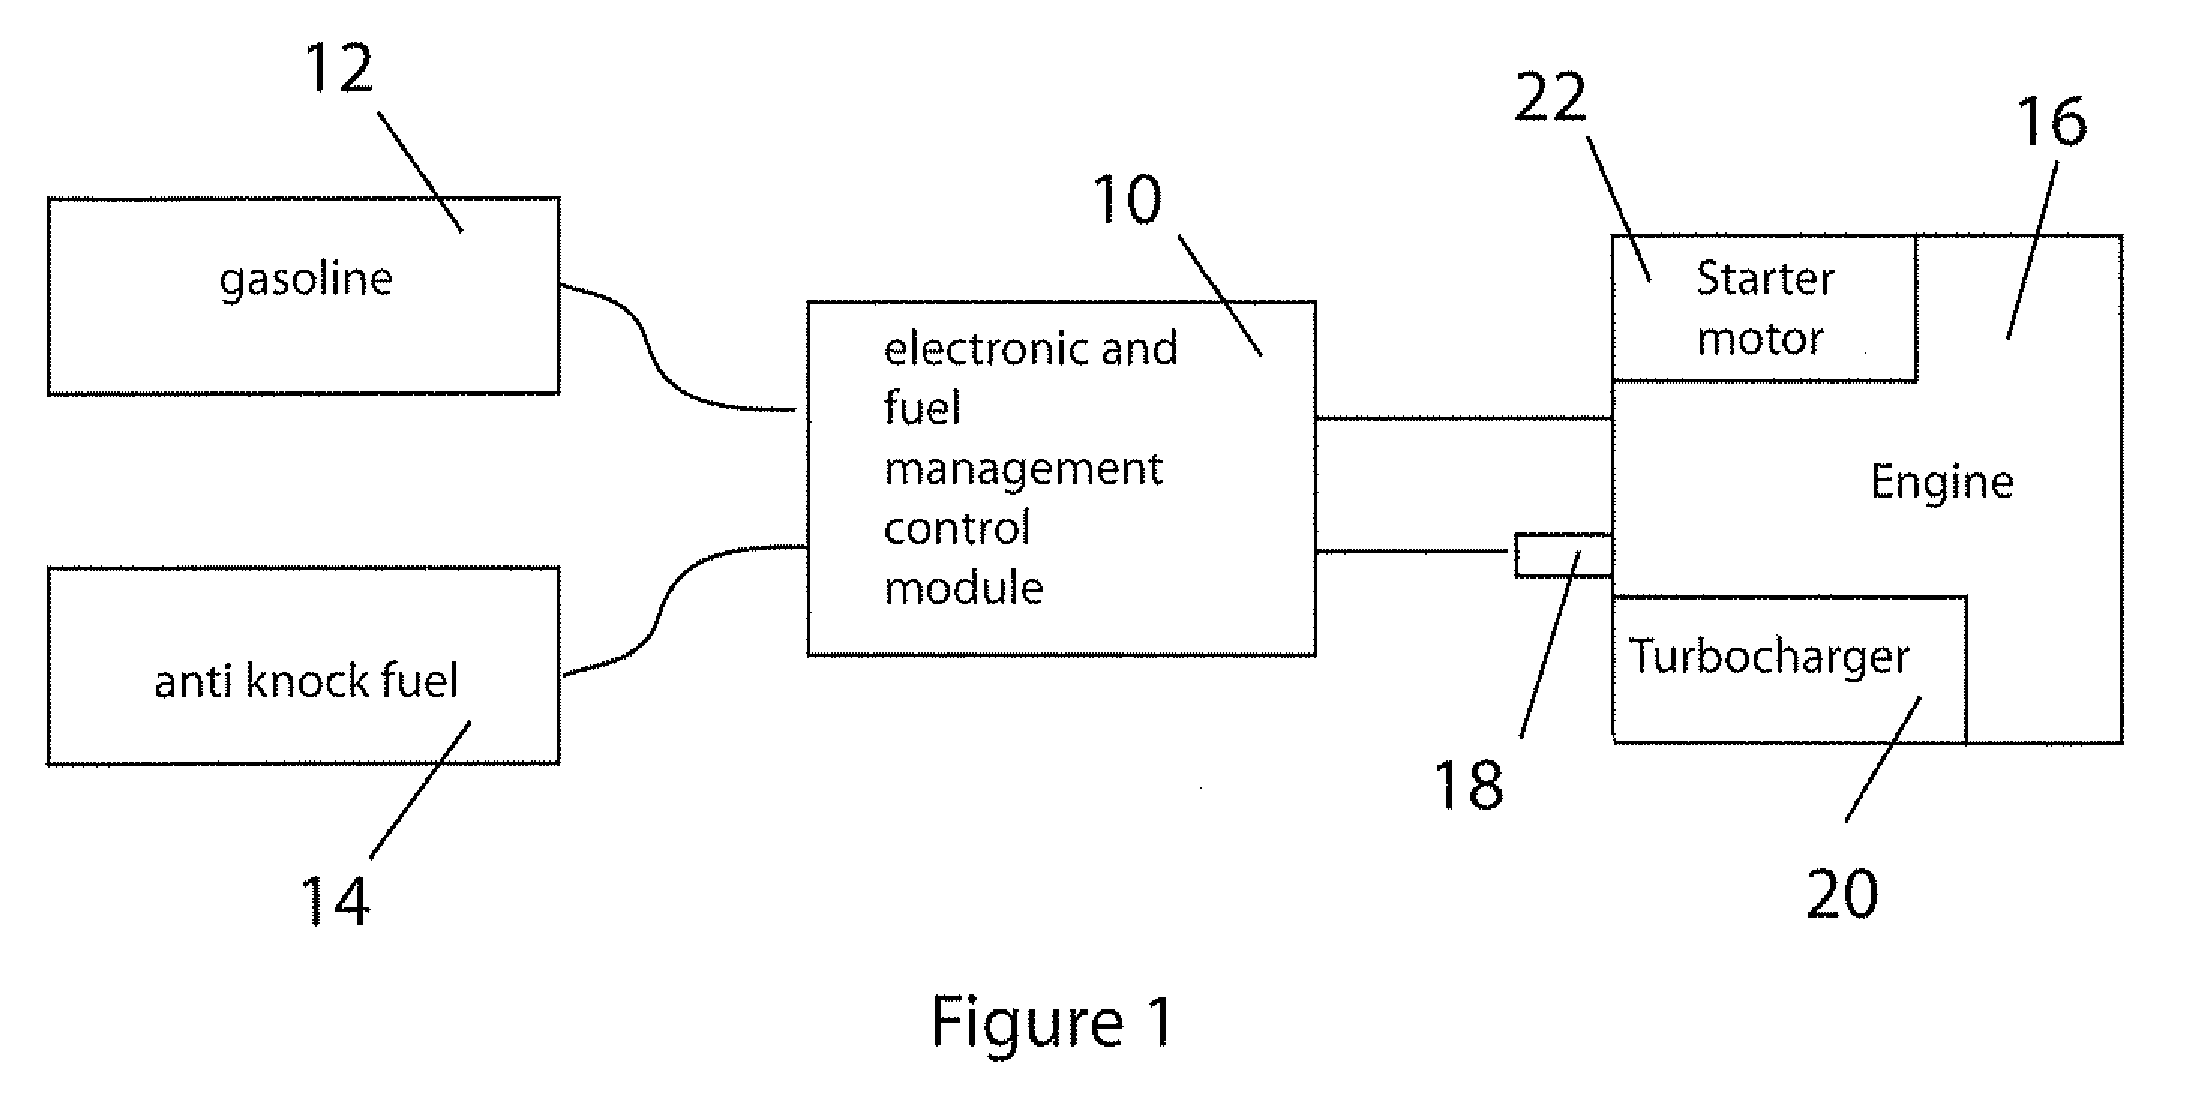 Gasoline Engine System Using Variable Direct Ethanol Injection and Engine Shutdown